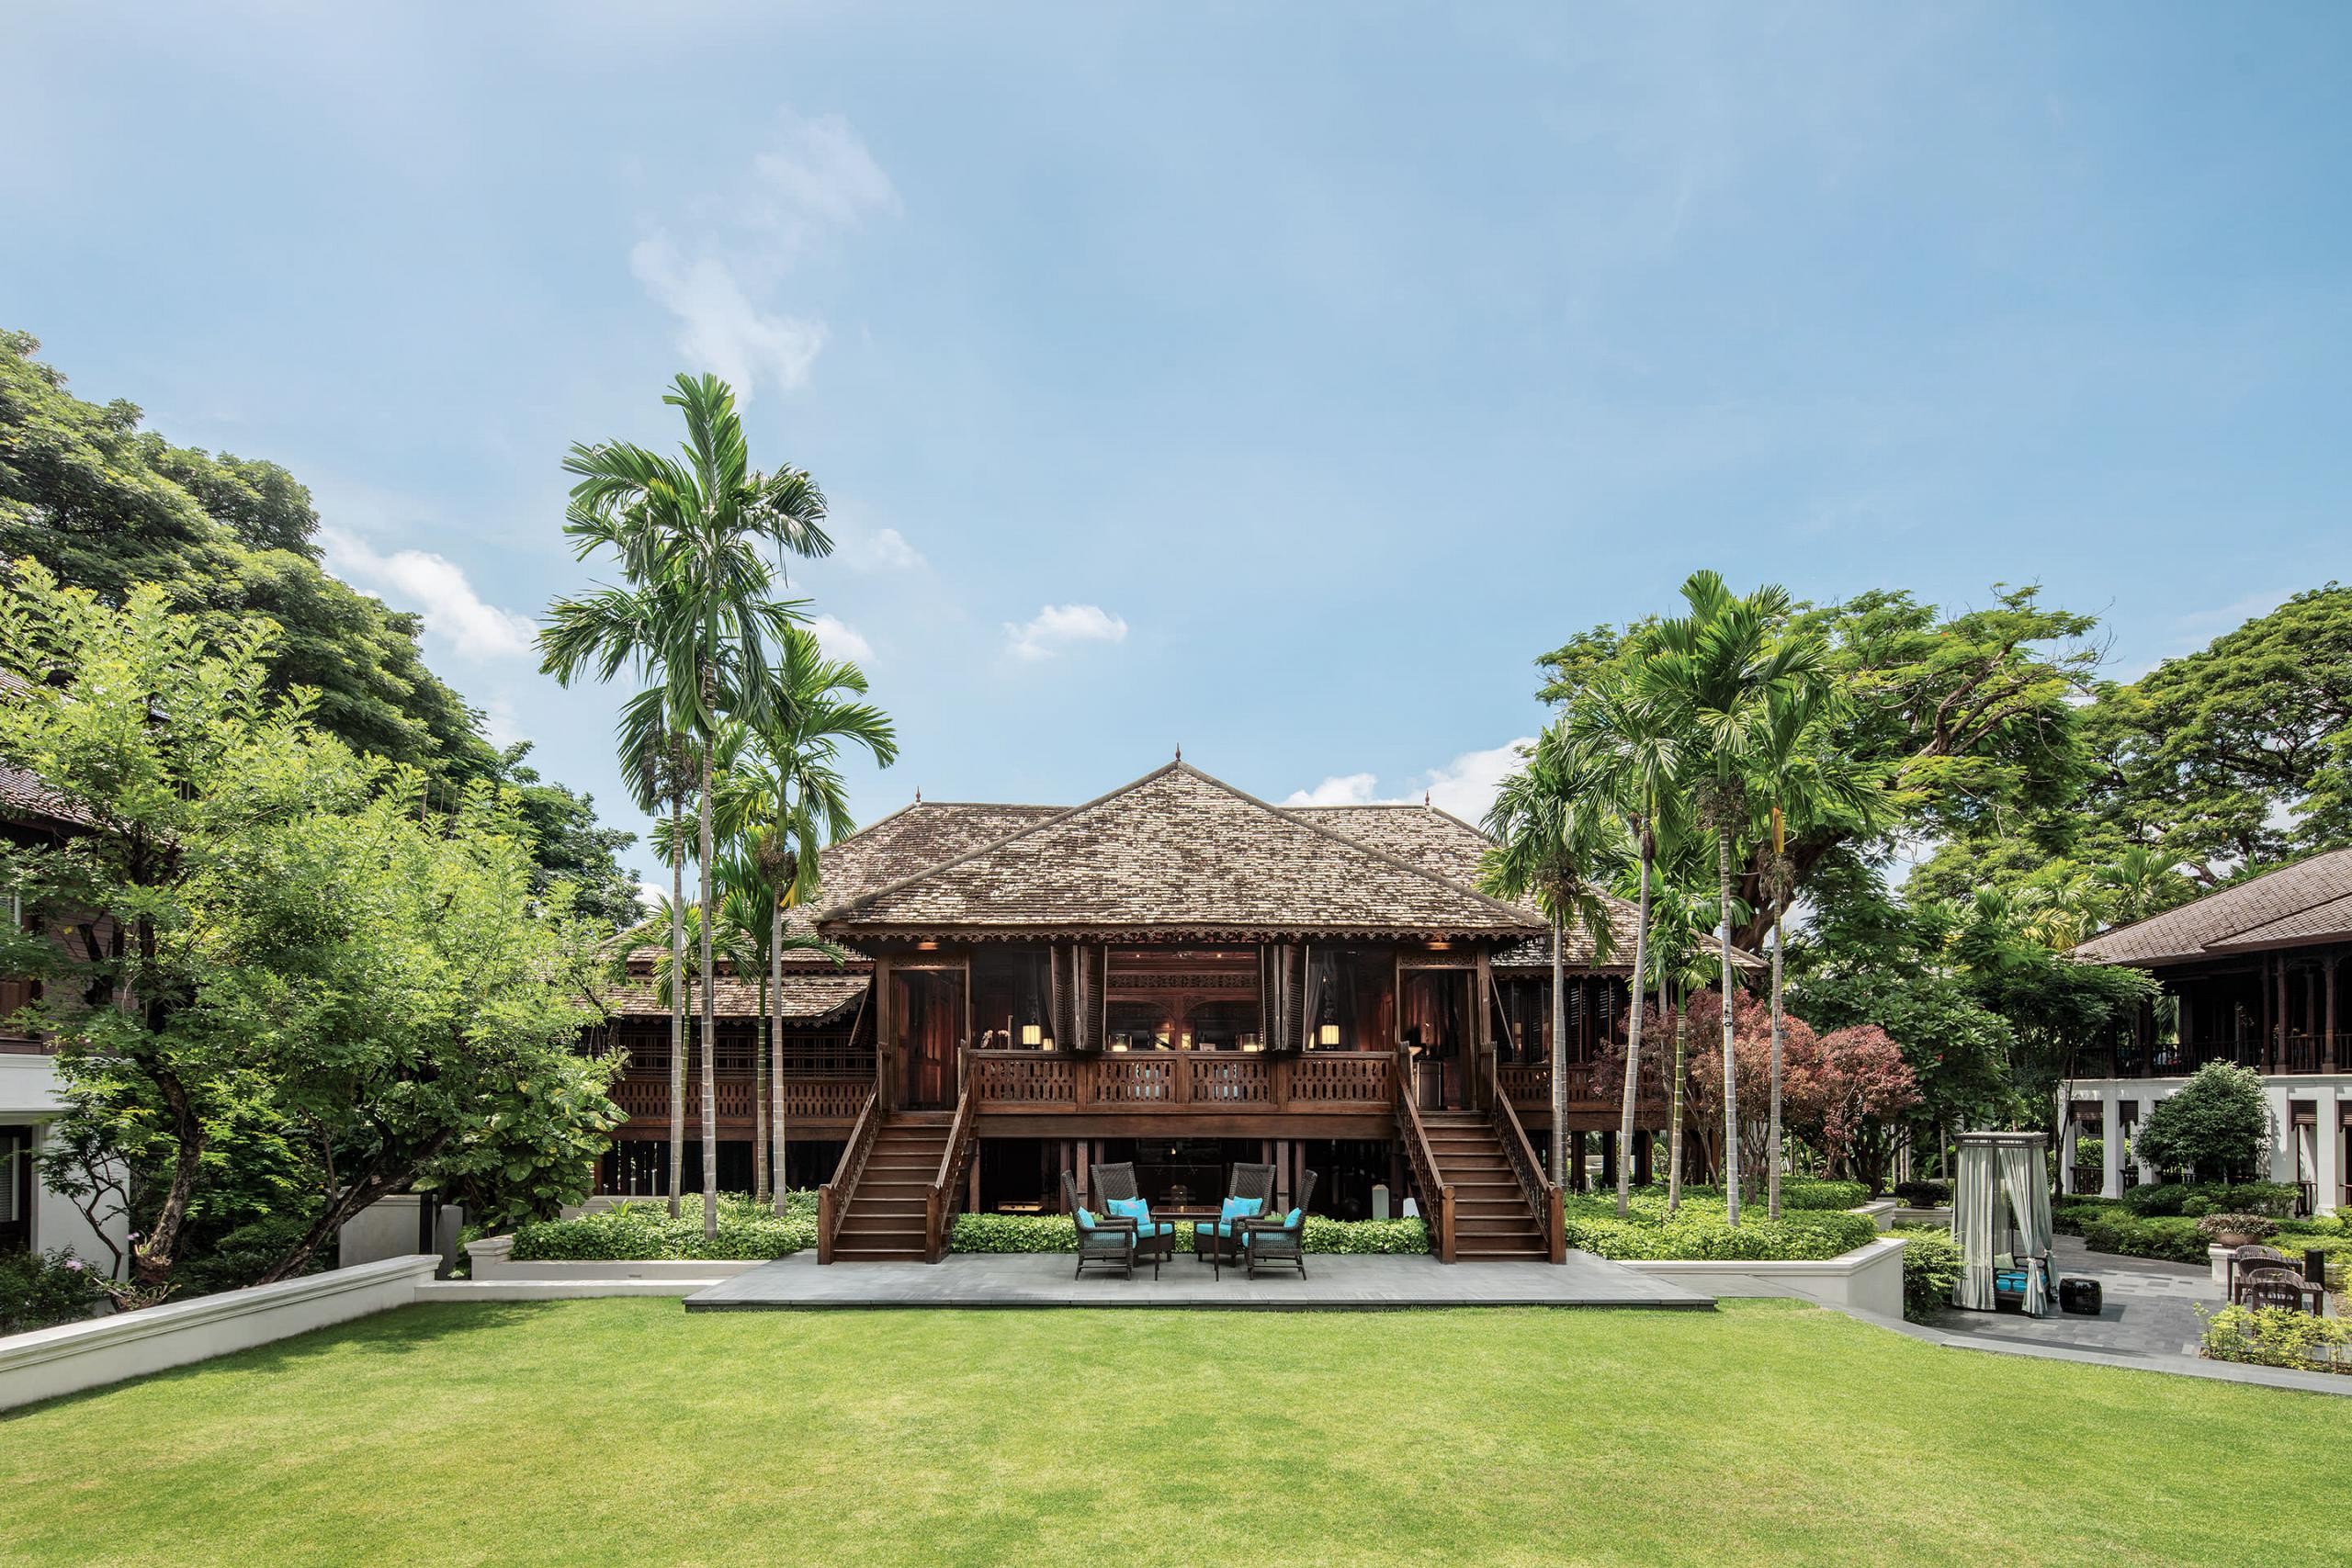 The century-old teak house that acts as the centrepiece of 137 Pillars House Chiang Mai, in northern Thailand. Photo: 137 Pillars House